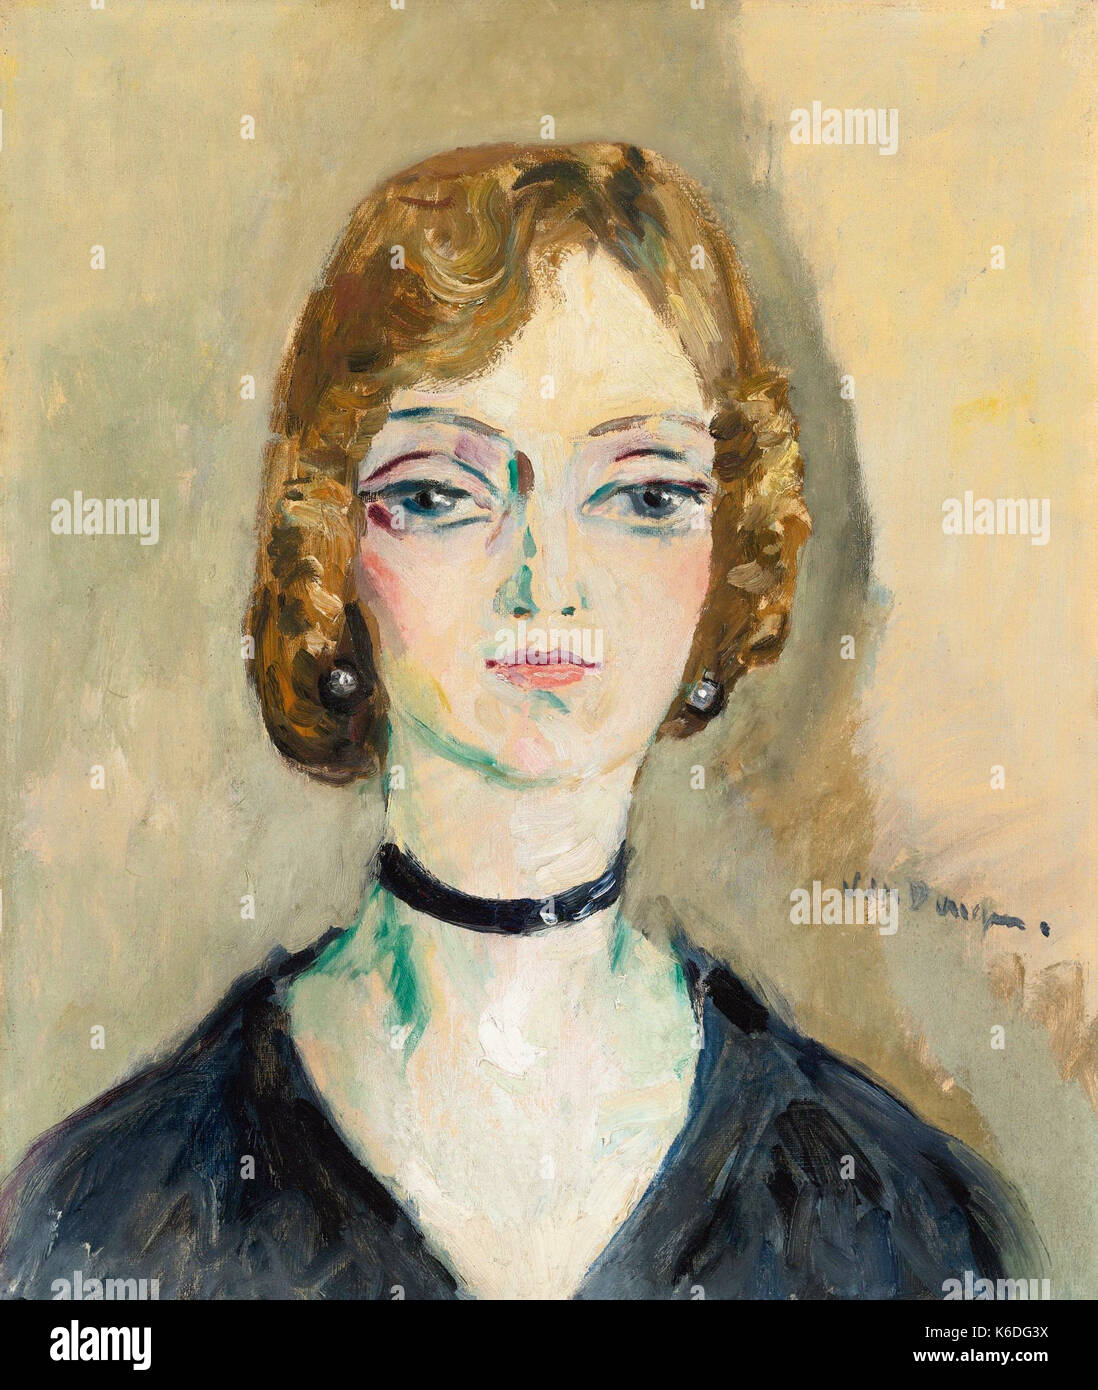 Kees van dongen femme High Resolution Stock Photography and Images - Alamy